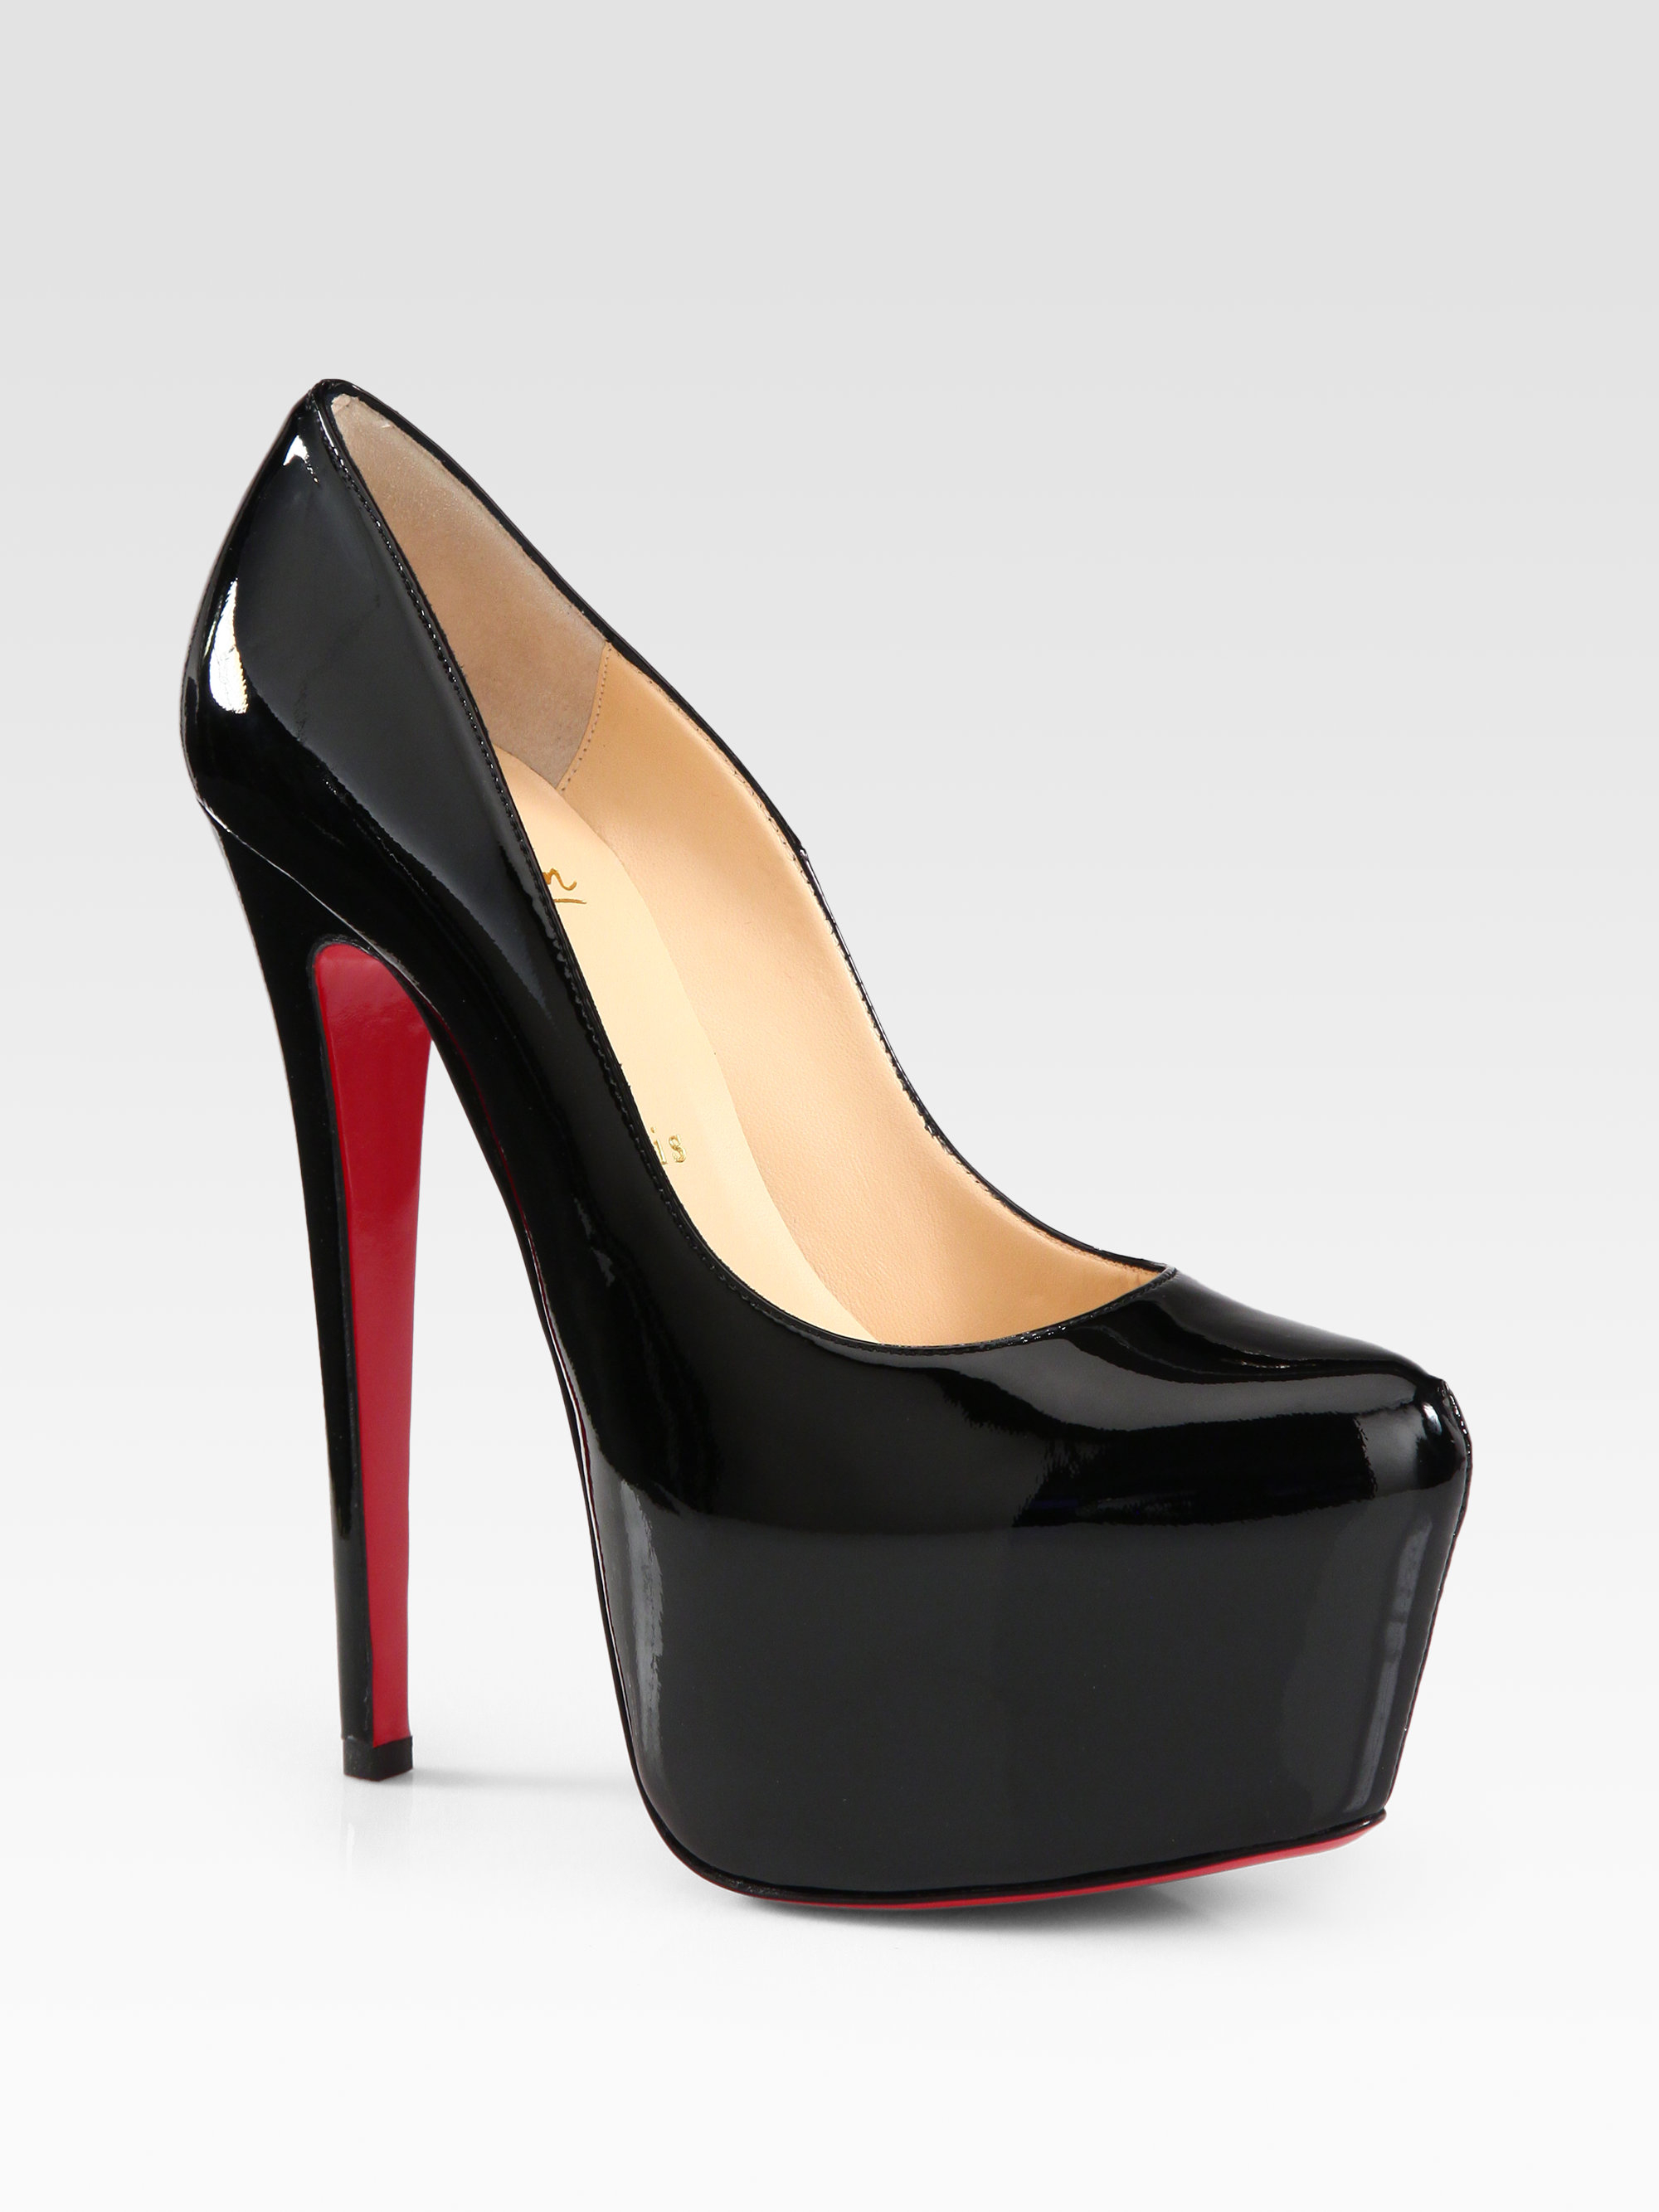 Christian Louboutin Patent Leather Platform Pumps in Black | Lyst